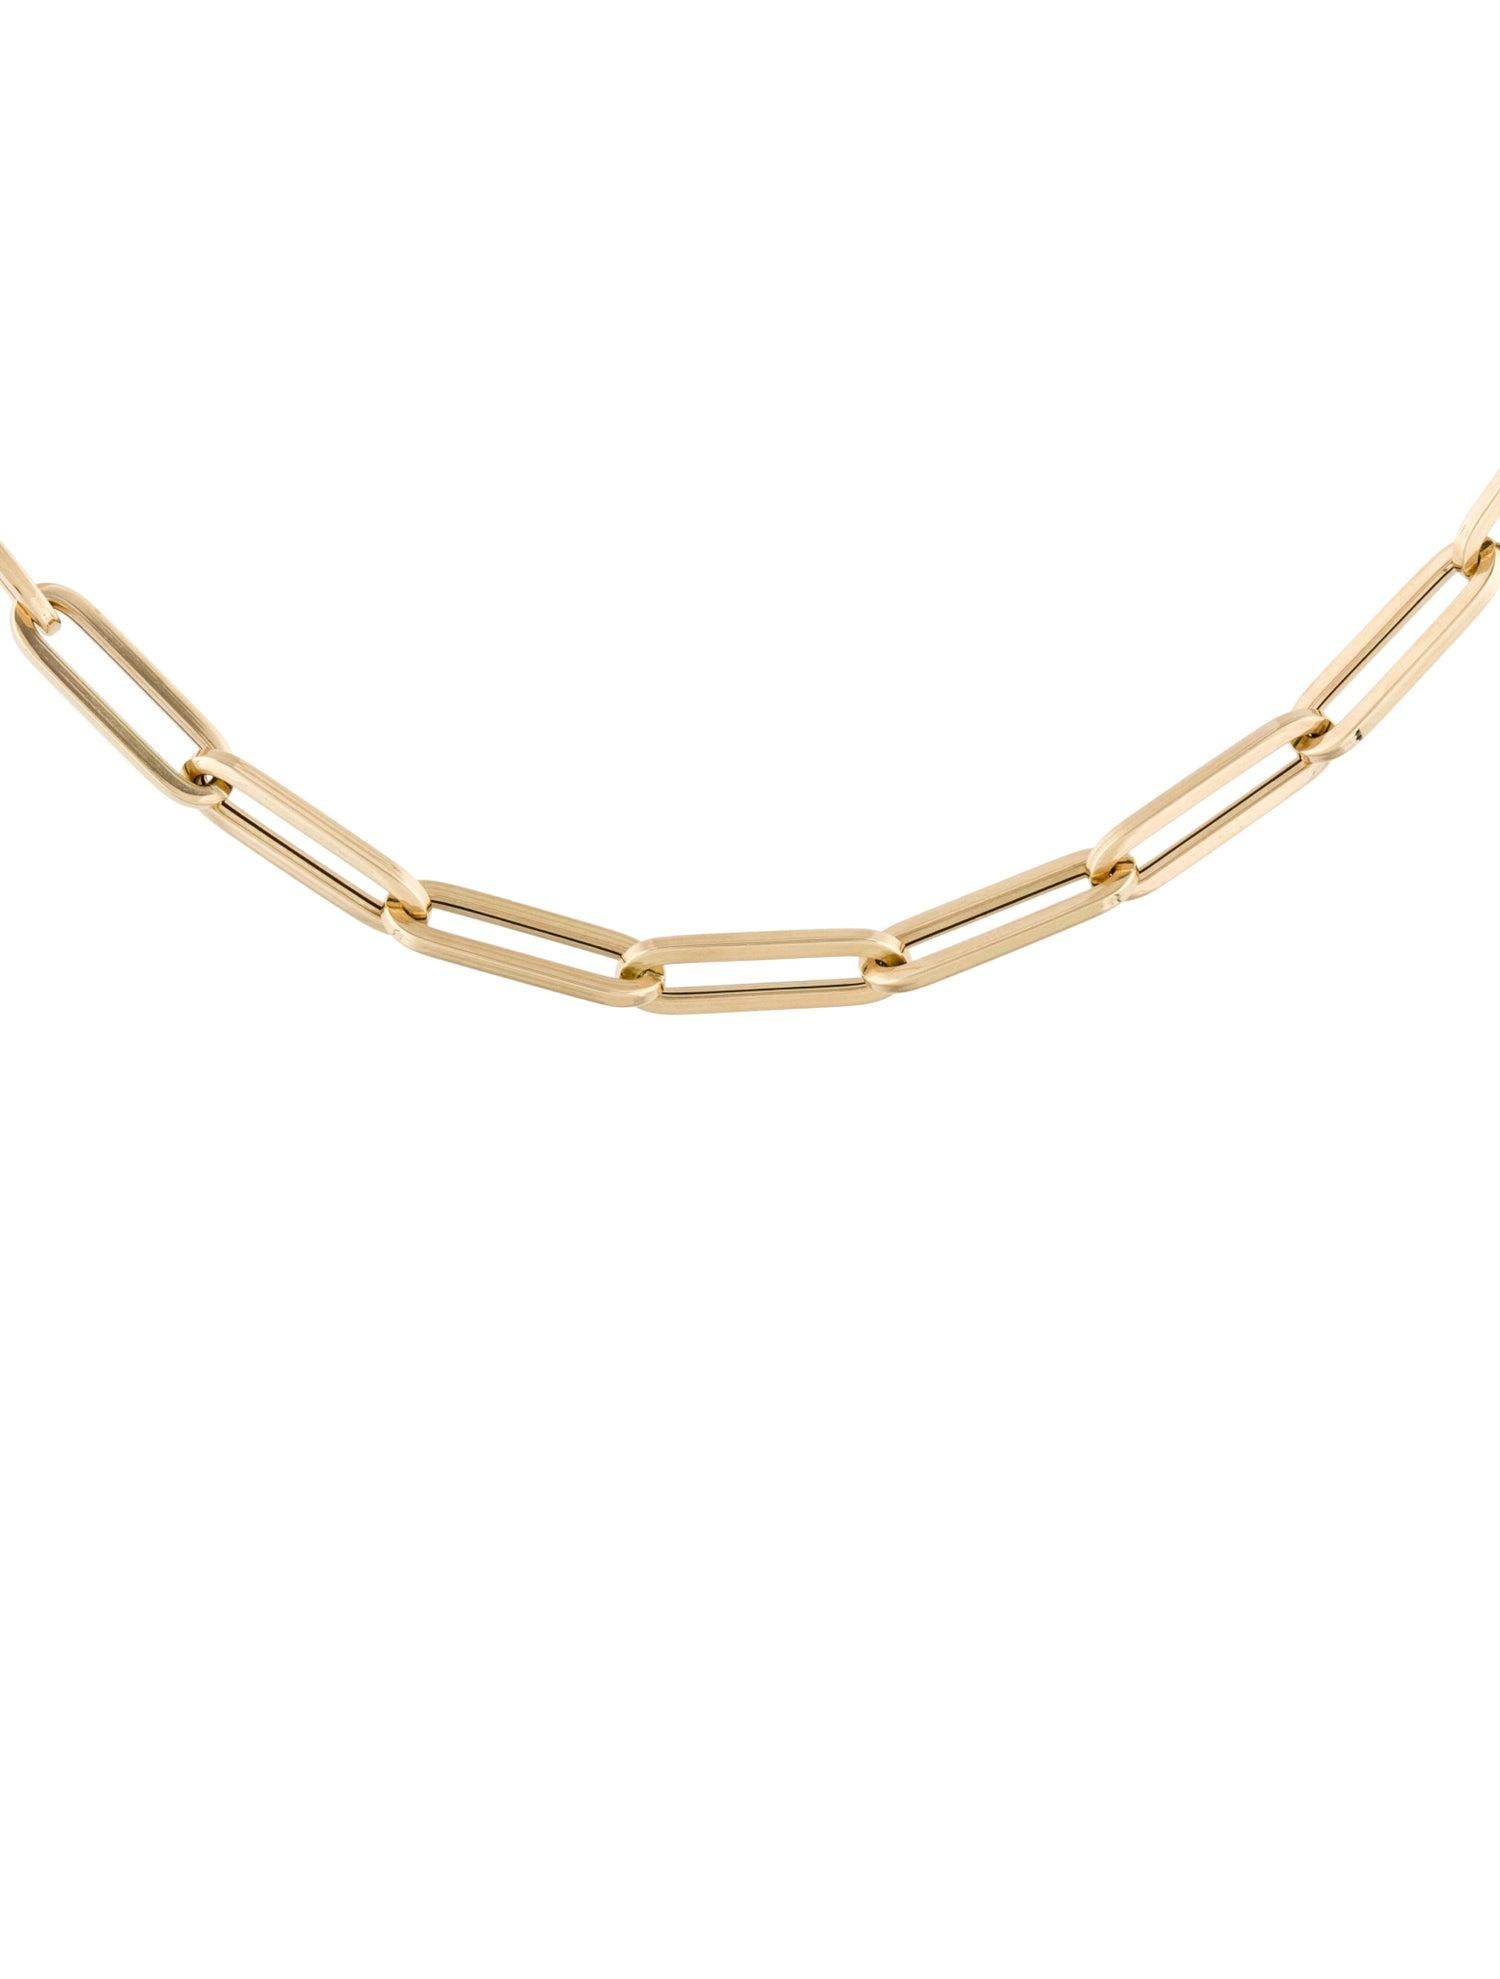 Women's 14 Karat Yellow Gold Paper Clip Link Chain Necklace, Made in Italy For Sale